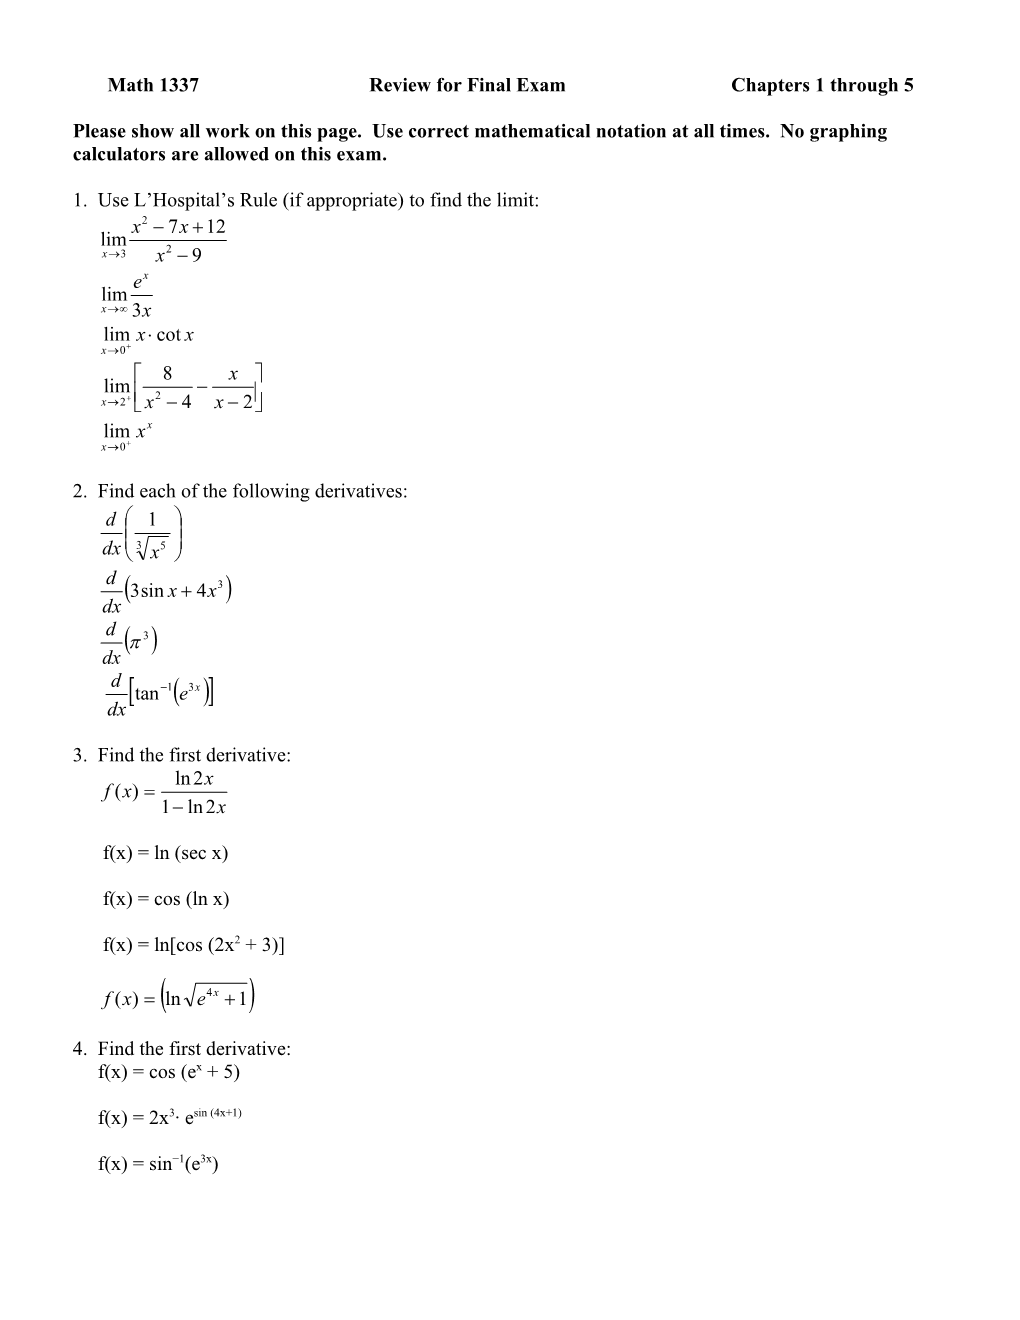 Math 1309-001: Review for Exam #4